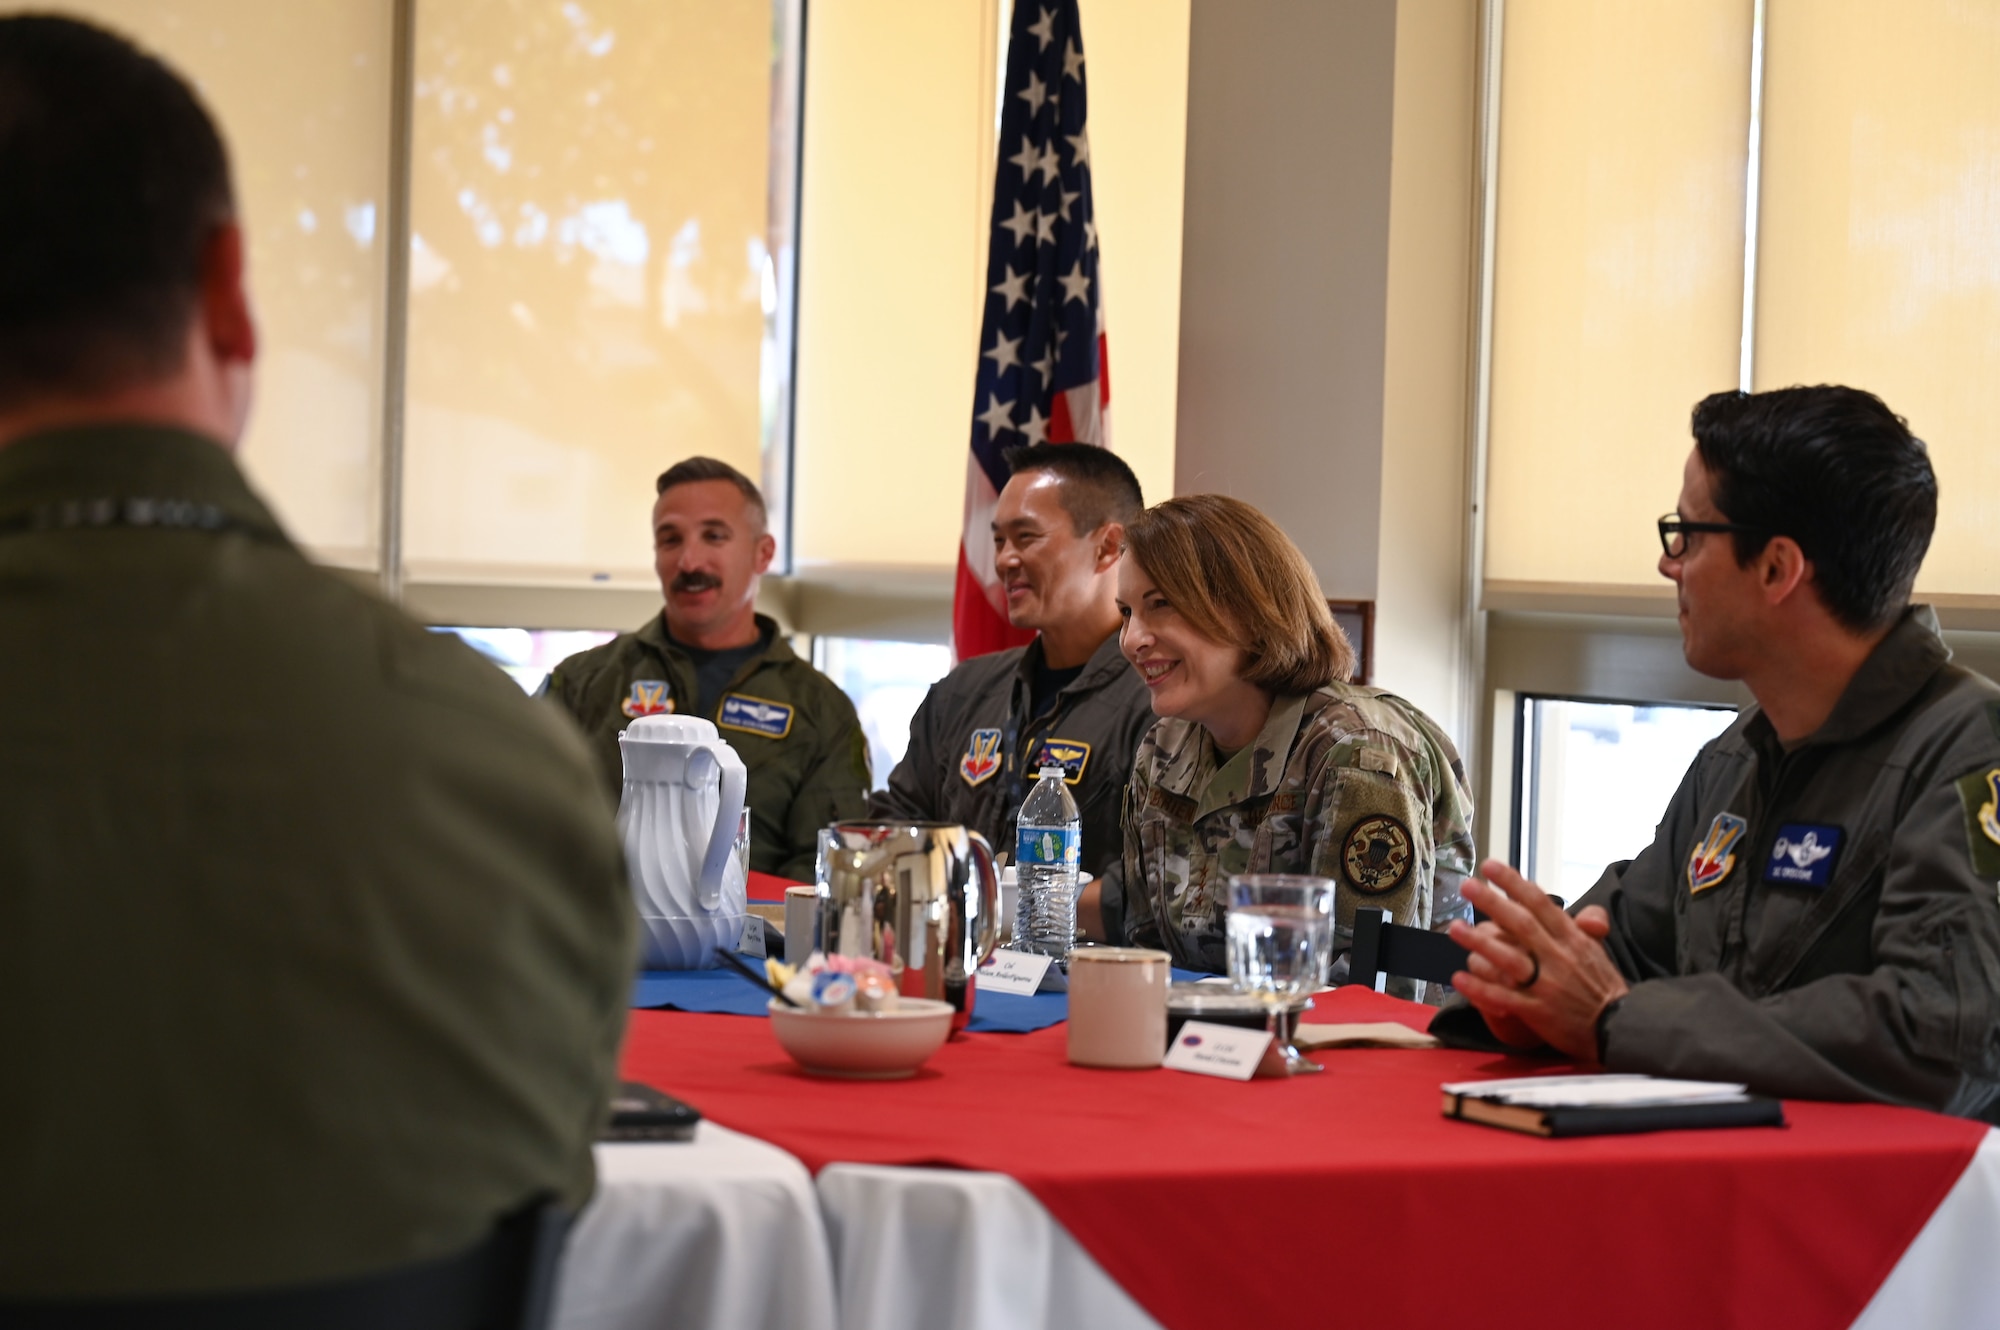 U.S. Air Force Lt. Gen. Mary O’Brien, Deputy Chief of Staff for Intelligence, Surveillance, Reconnaissance and Cyber Effects Operations, sits down with 350th Spectrum Warfare Wing (SWW) squadron leaders at Eglin Air Force Base, Fla., Nov. 18, 2022. The 350th SWW will develop and employ evolutionary, cutting-edge capabilities to warfighters that will make decisive impacts in battle, achieving commanders’ objectives and allow our warfighters to beat our near-peer competitors across the spectrum. (U.S. Air Force photo by Staff Sgt. Ericka A. Woolever)